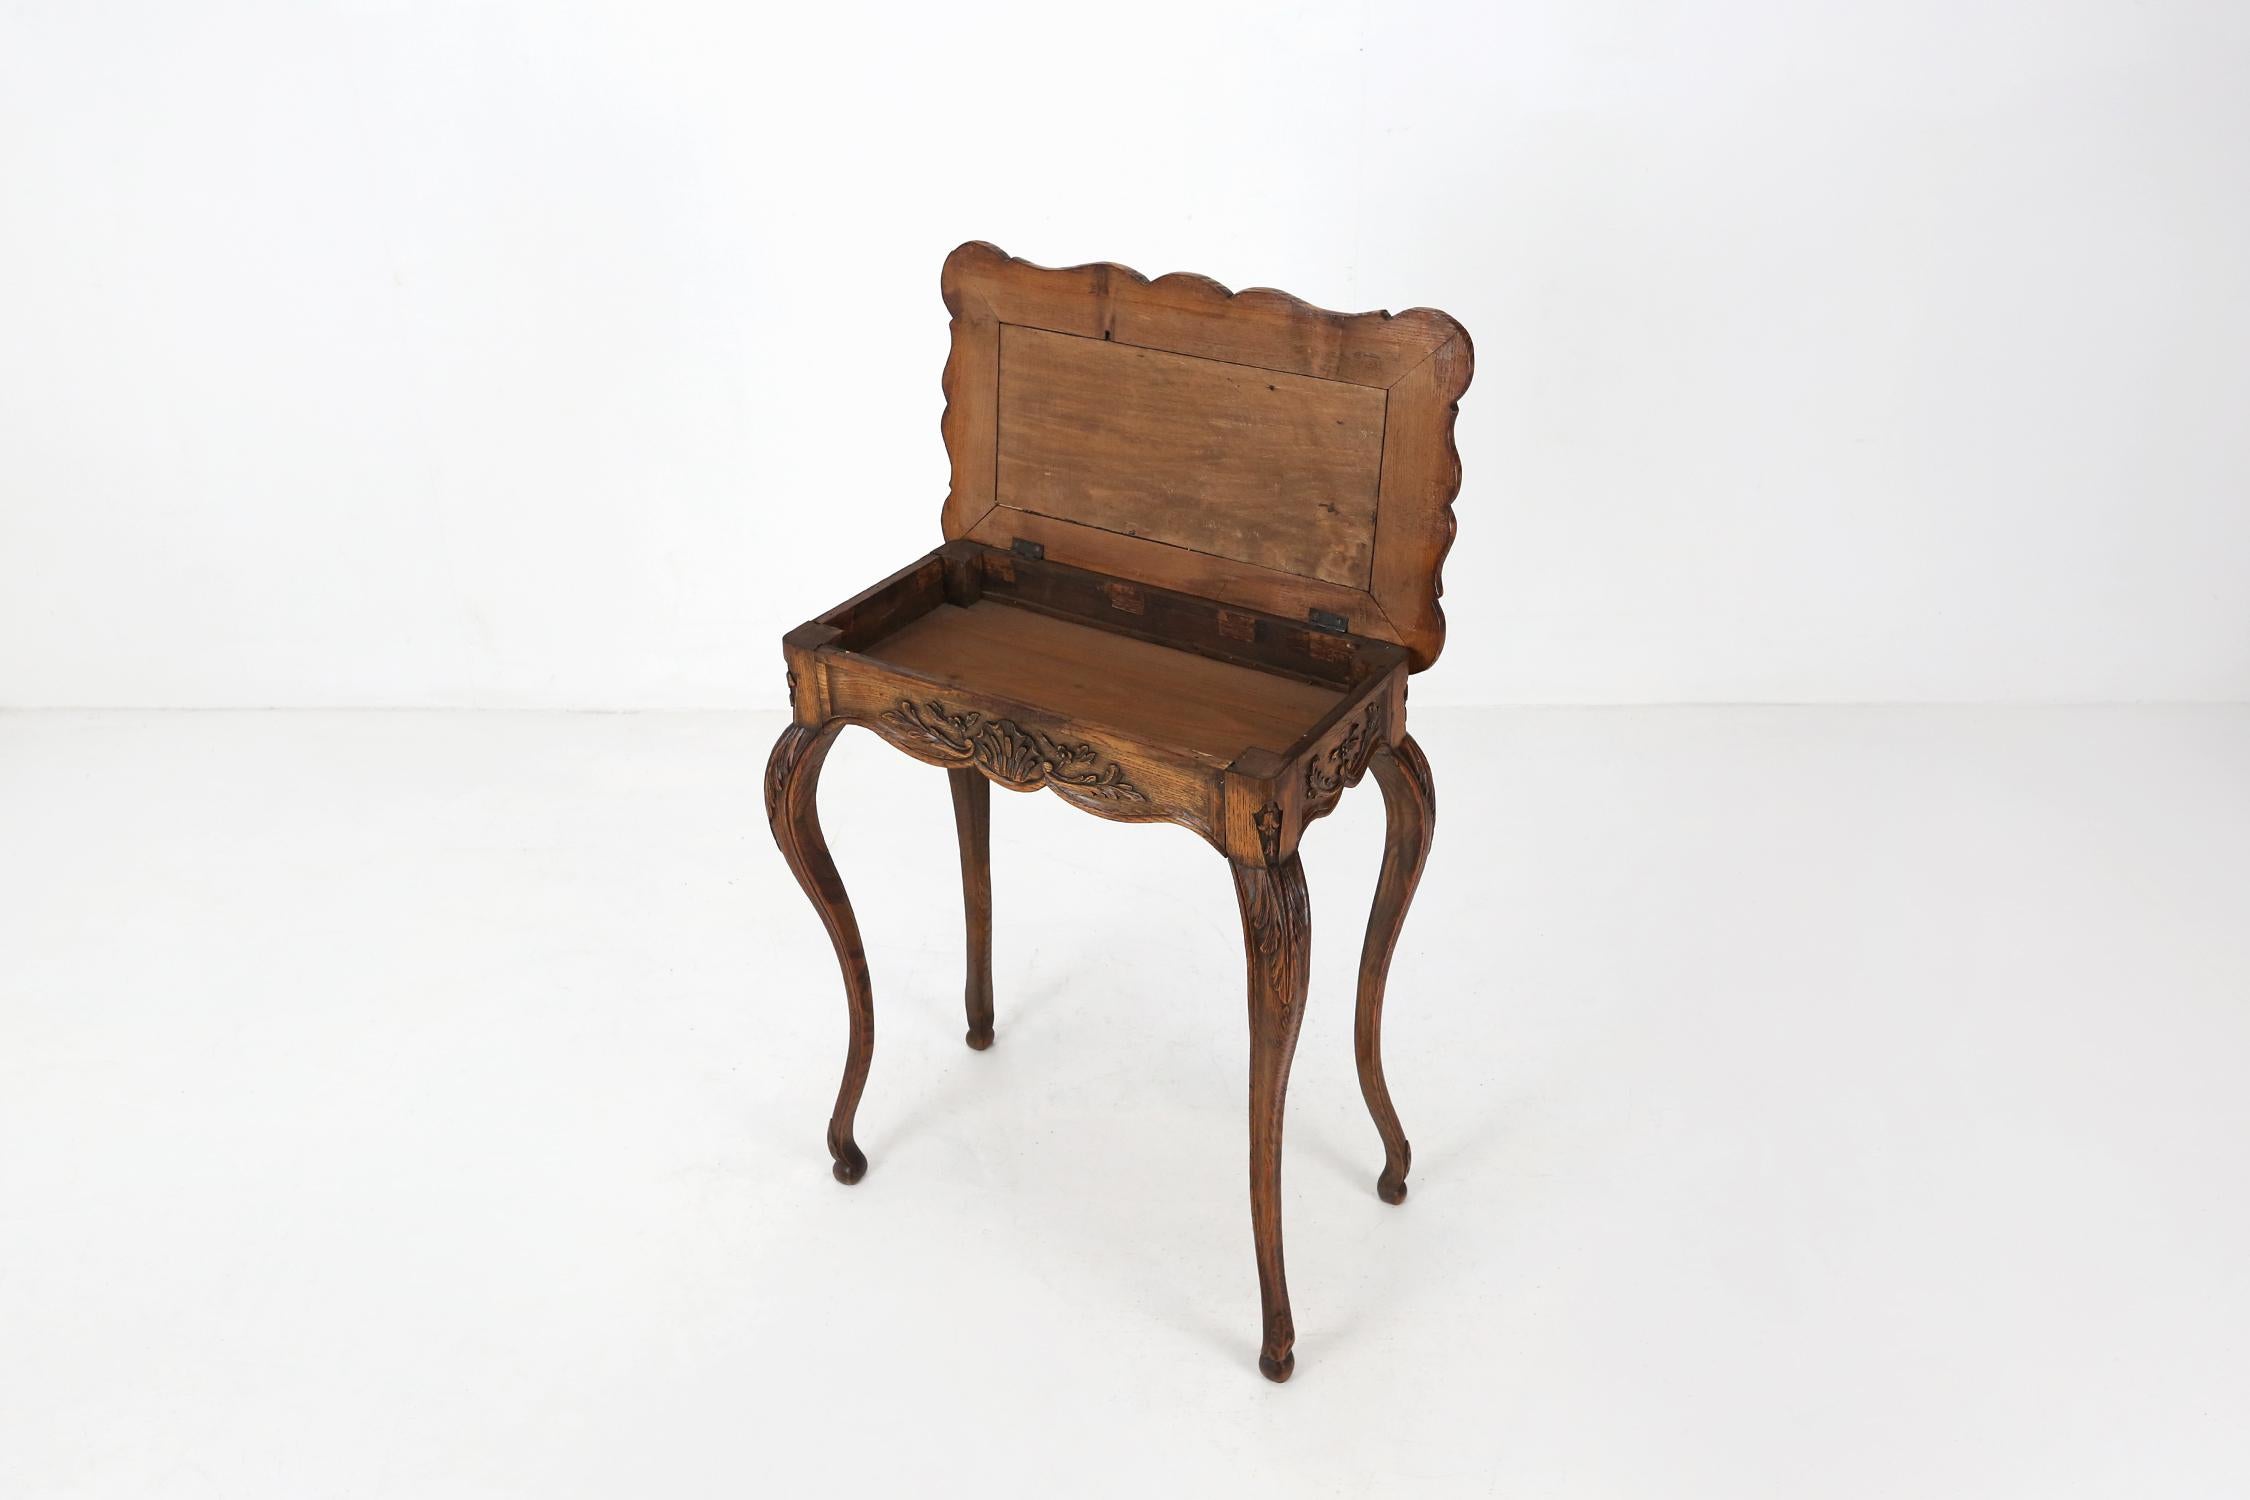 Antique wooden folding side table with some nice sculpture details made around 1900.